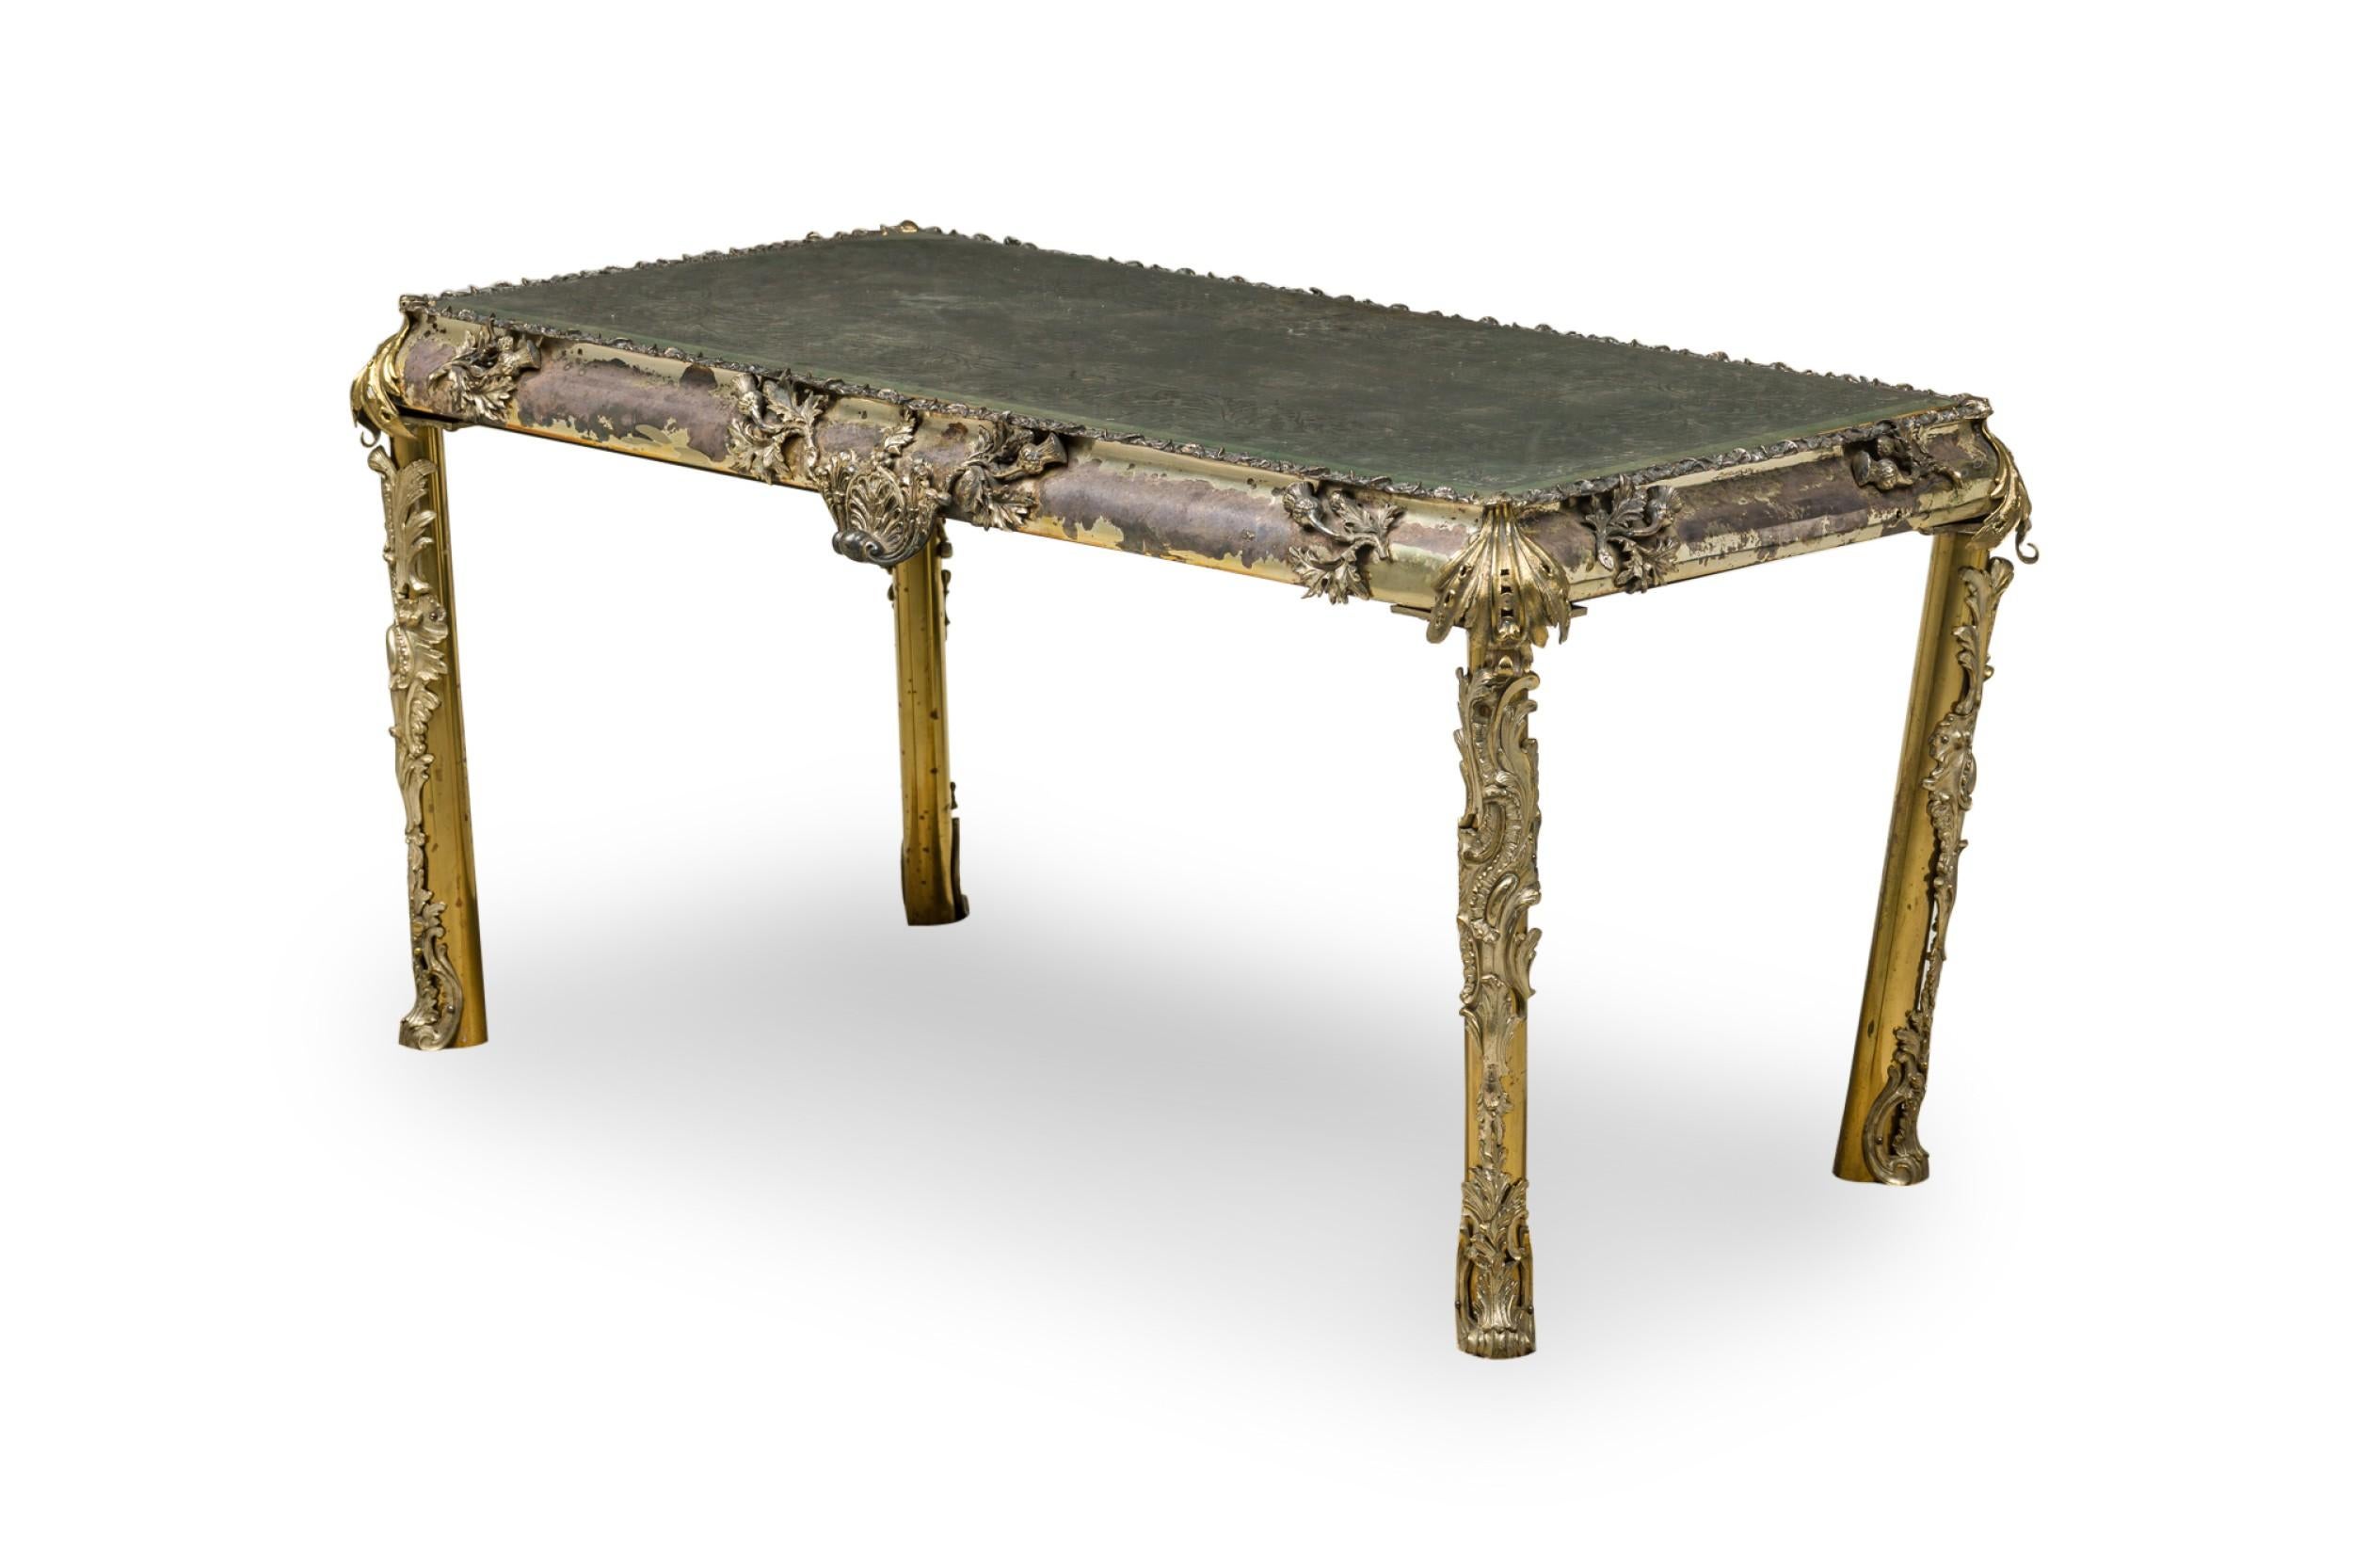 English Georgian (19th Cent) rectangular coffee / low table with an elaborately cast silver plate and bronze frame and an antique etched floral and scroll design mirrored top.
 

 Oxidation, tarnishing, and losses to table surface, one leg bent